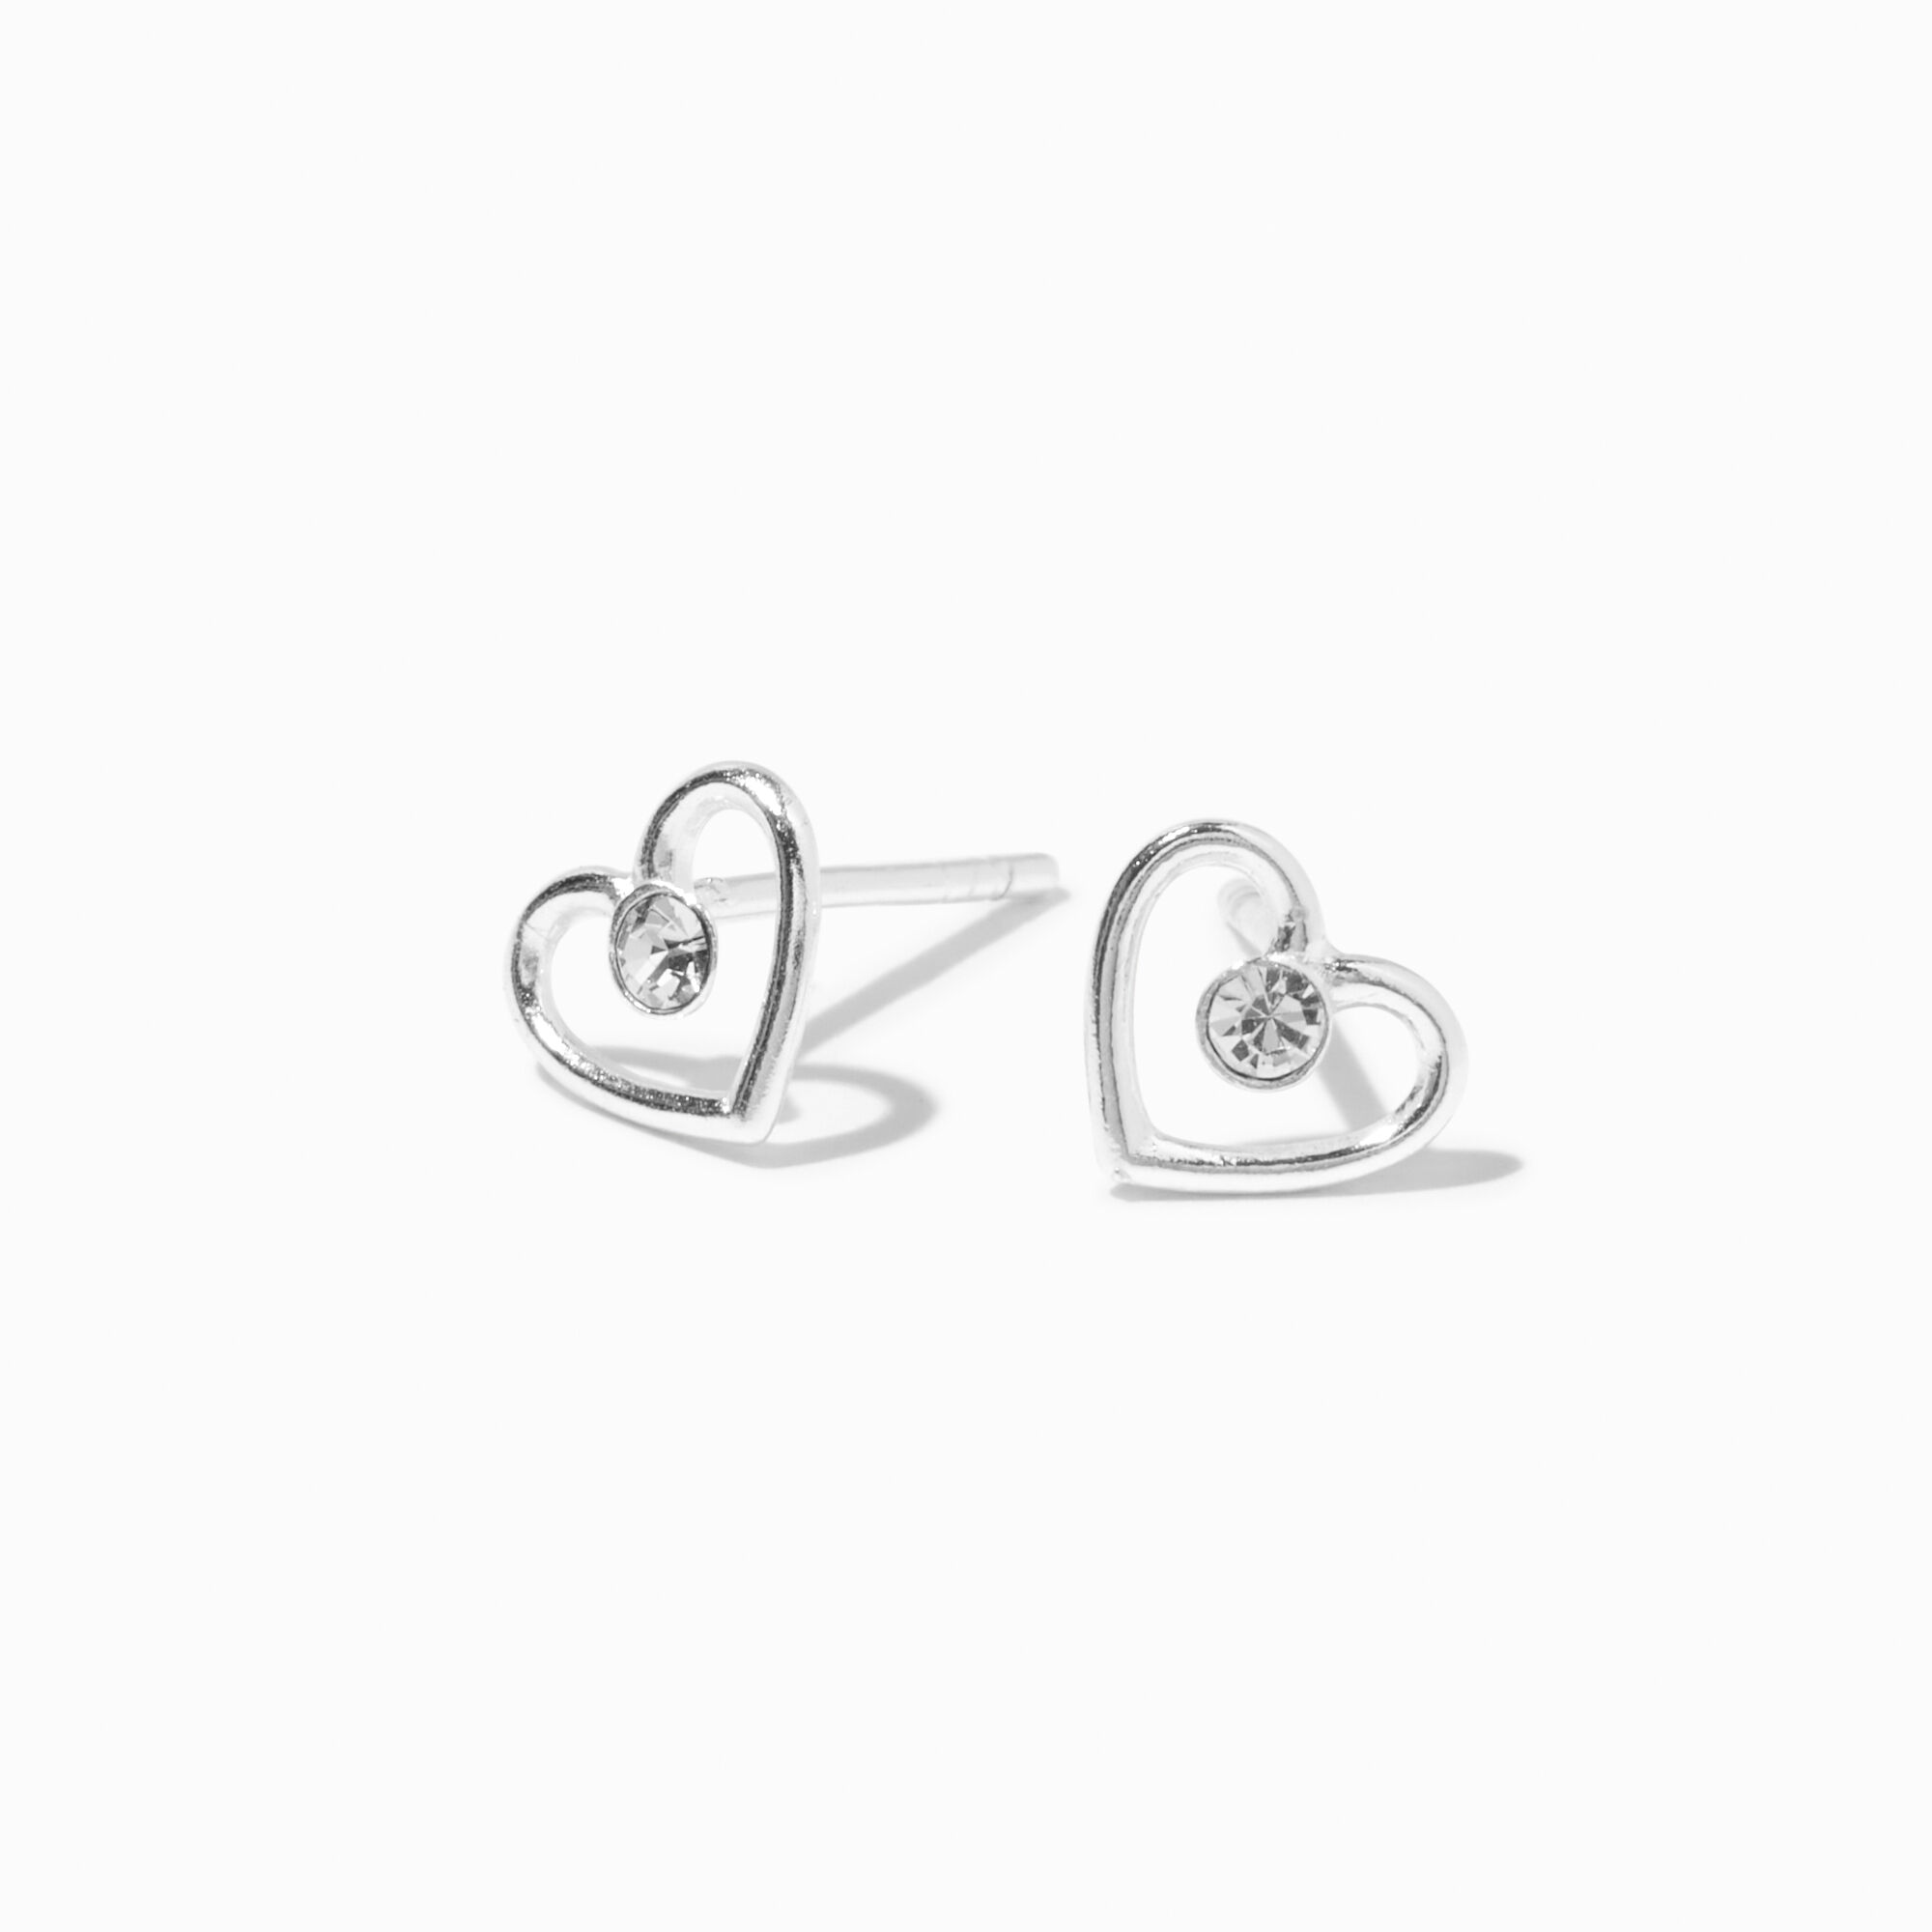 View Claires Heart Outline Stud Earrings Silver information